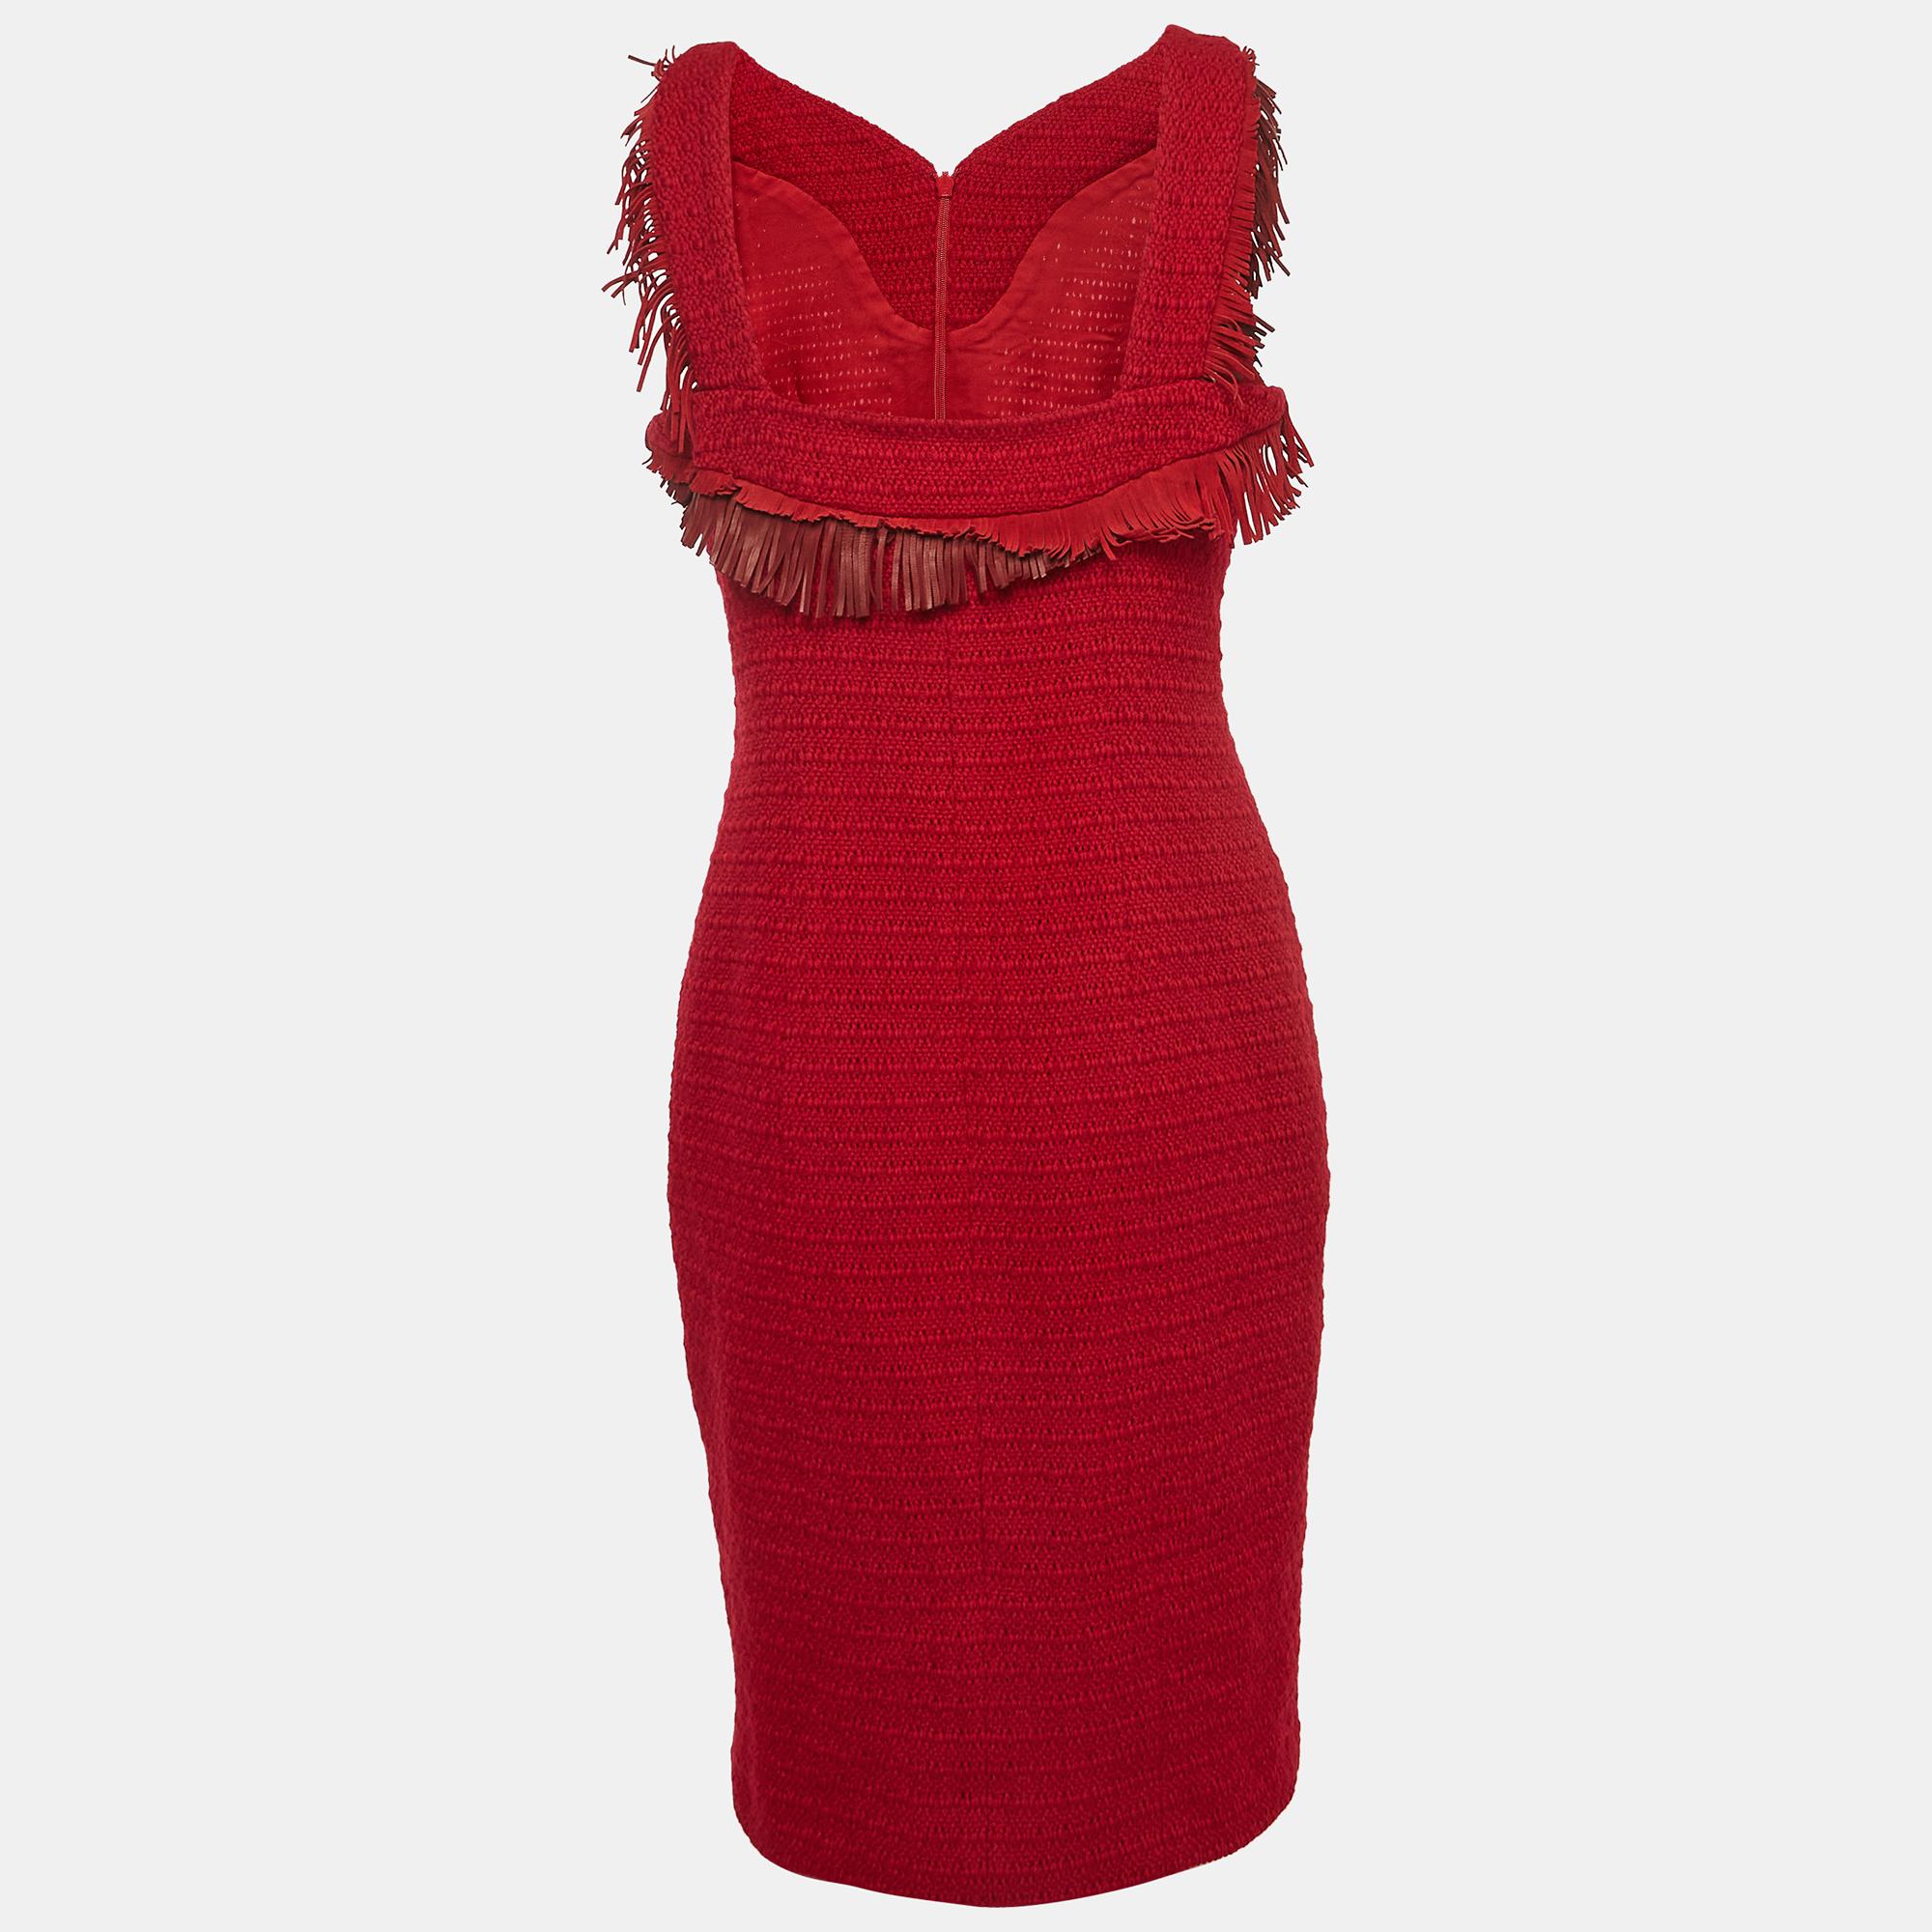 Women's Chanel Red Suede Fringed Tweed Sleeveless Short Dress L